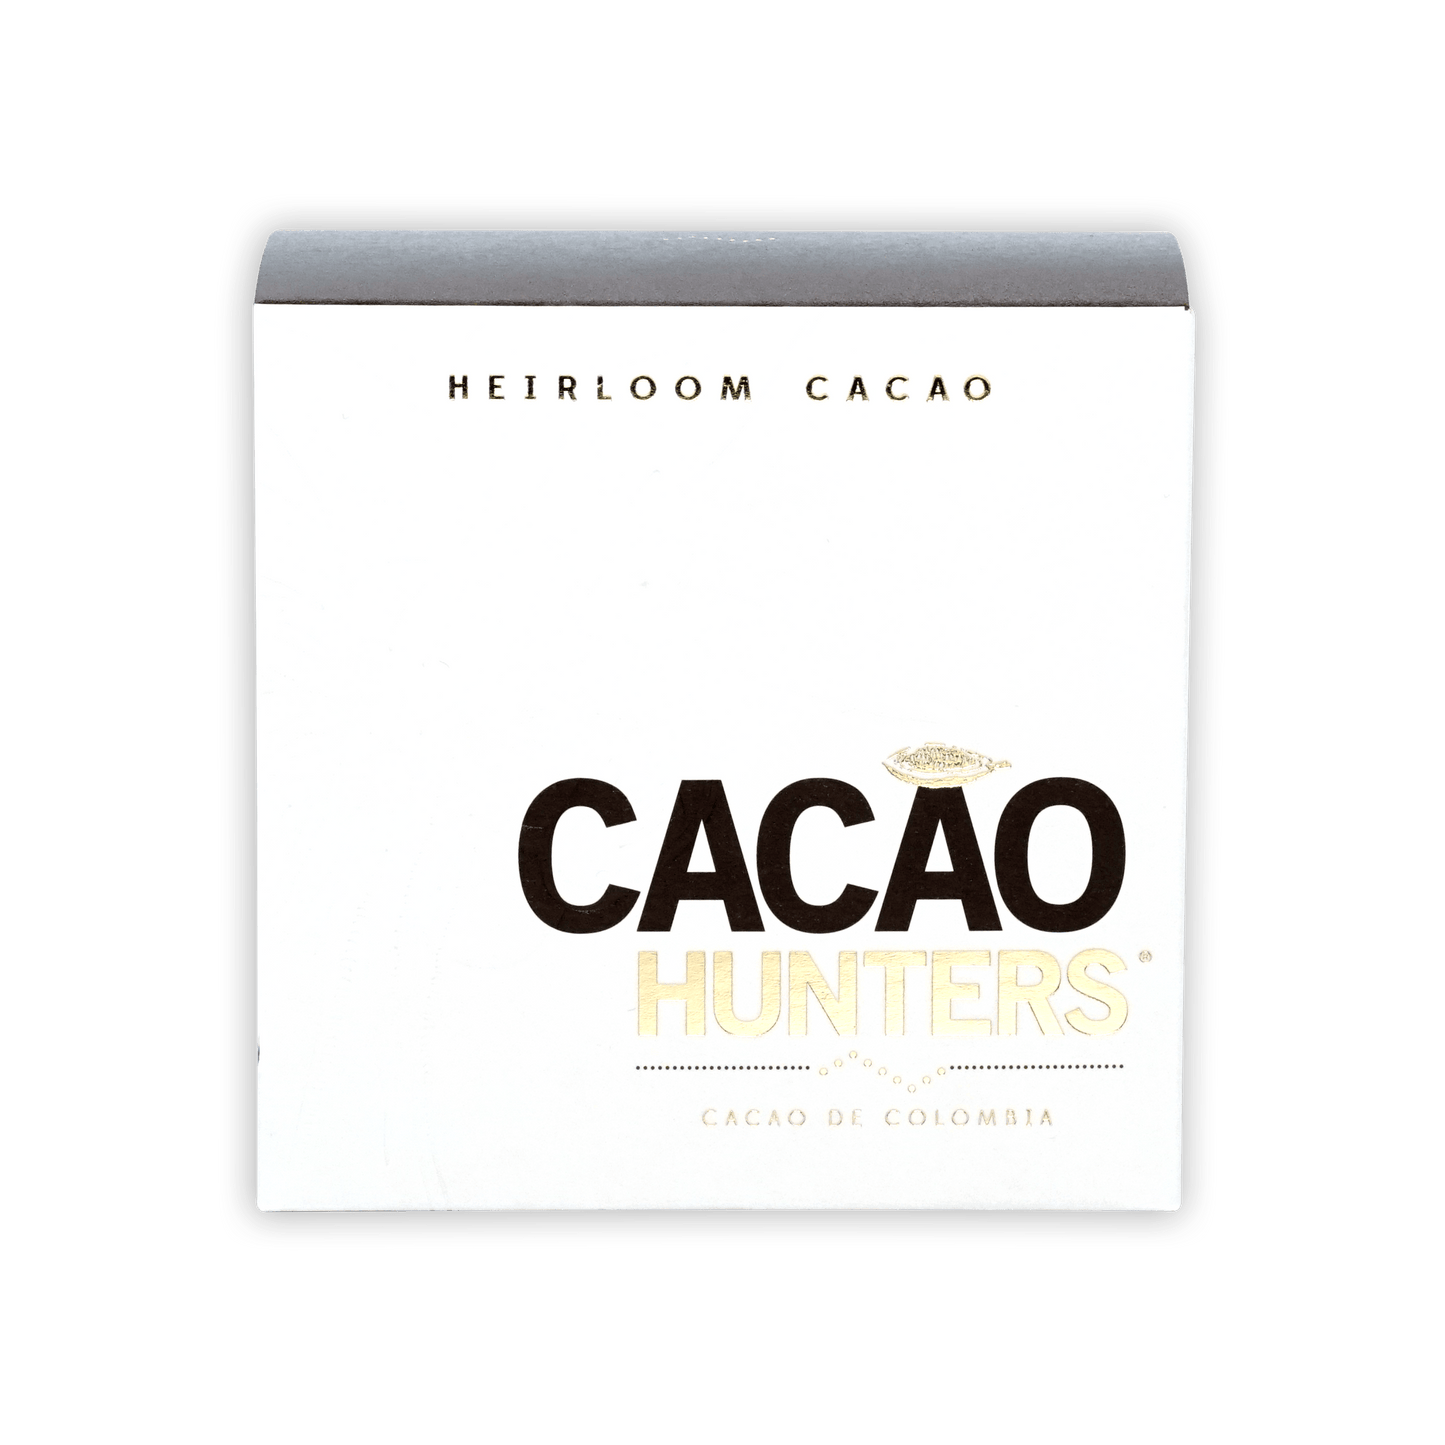 Cacao Hunters Heirloom Collection Dark Chocolate Gift by Bar & Cocoa